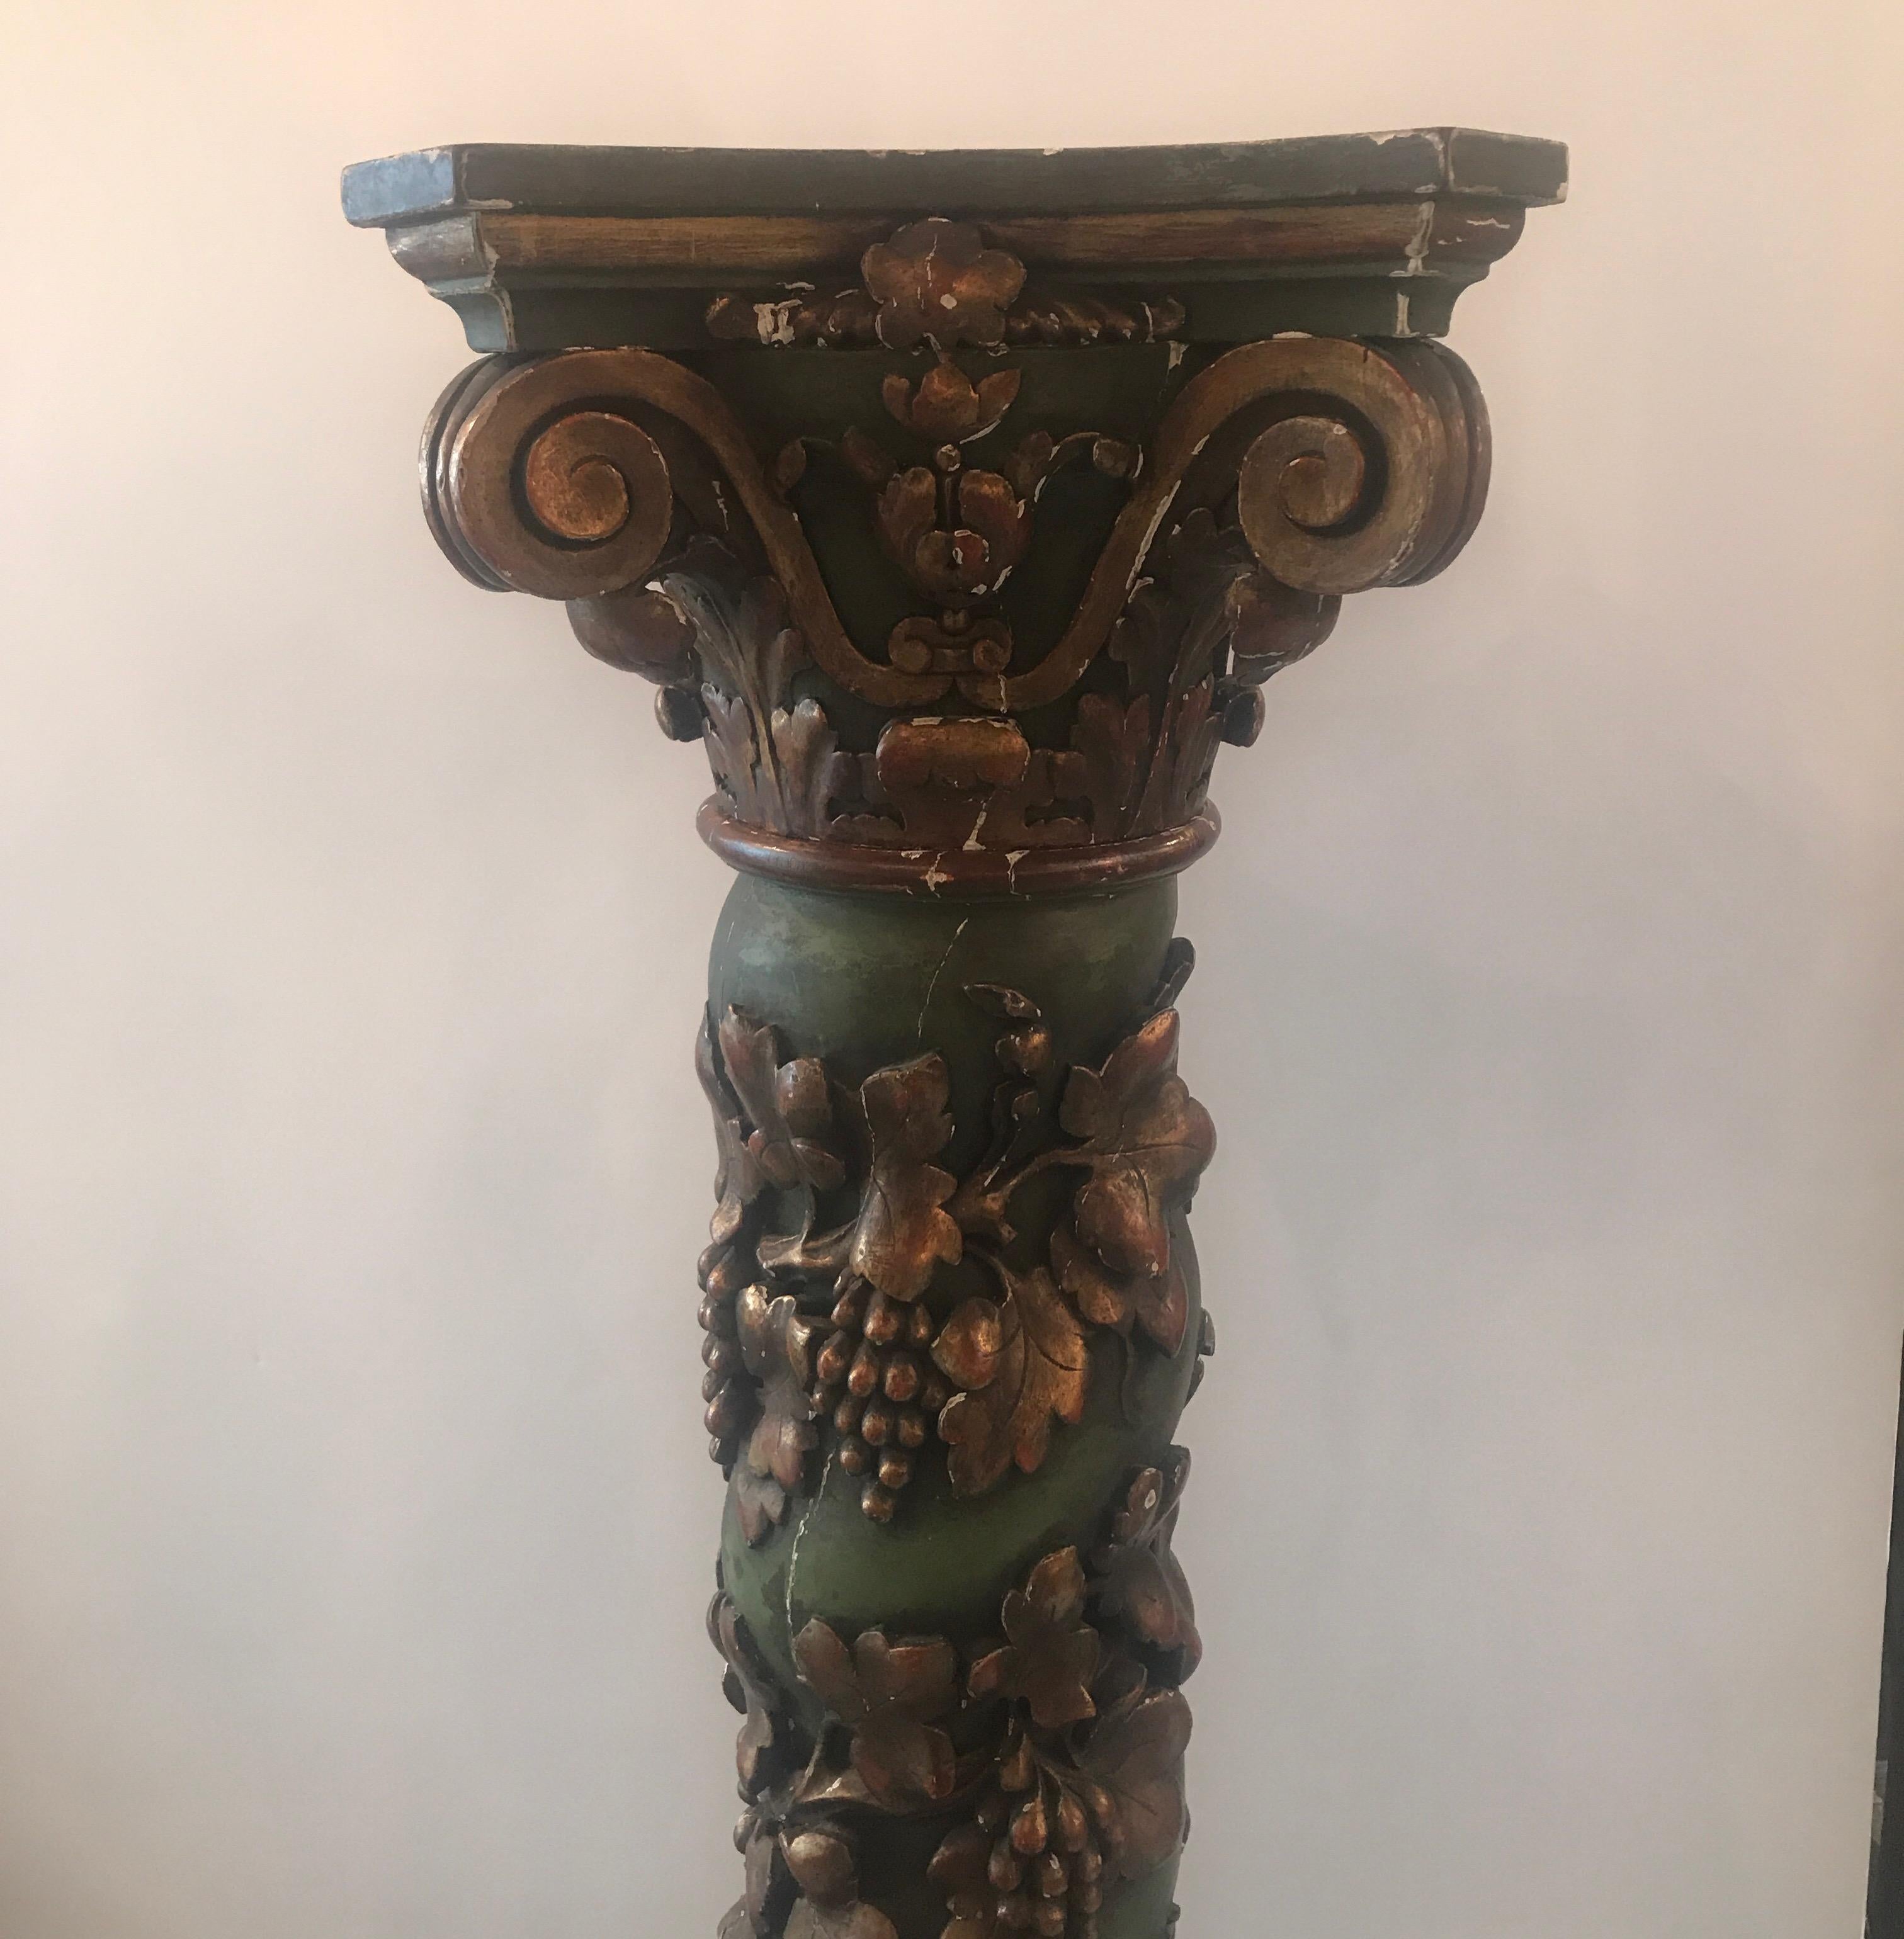 Exceptional carved solid oak poly chromed pedestal with column and grape vine motif. The original gold and green finish with expected original wear in untouched condition and displays well or can be restored.